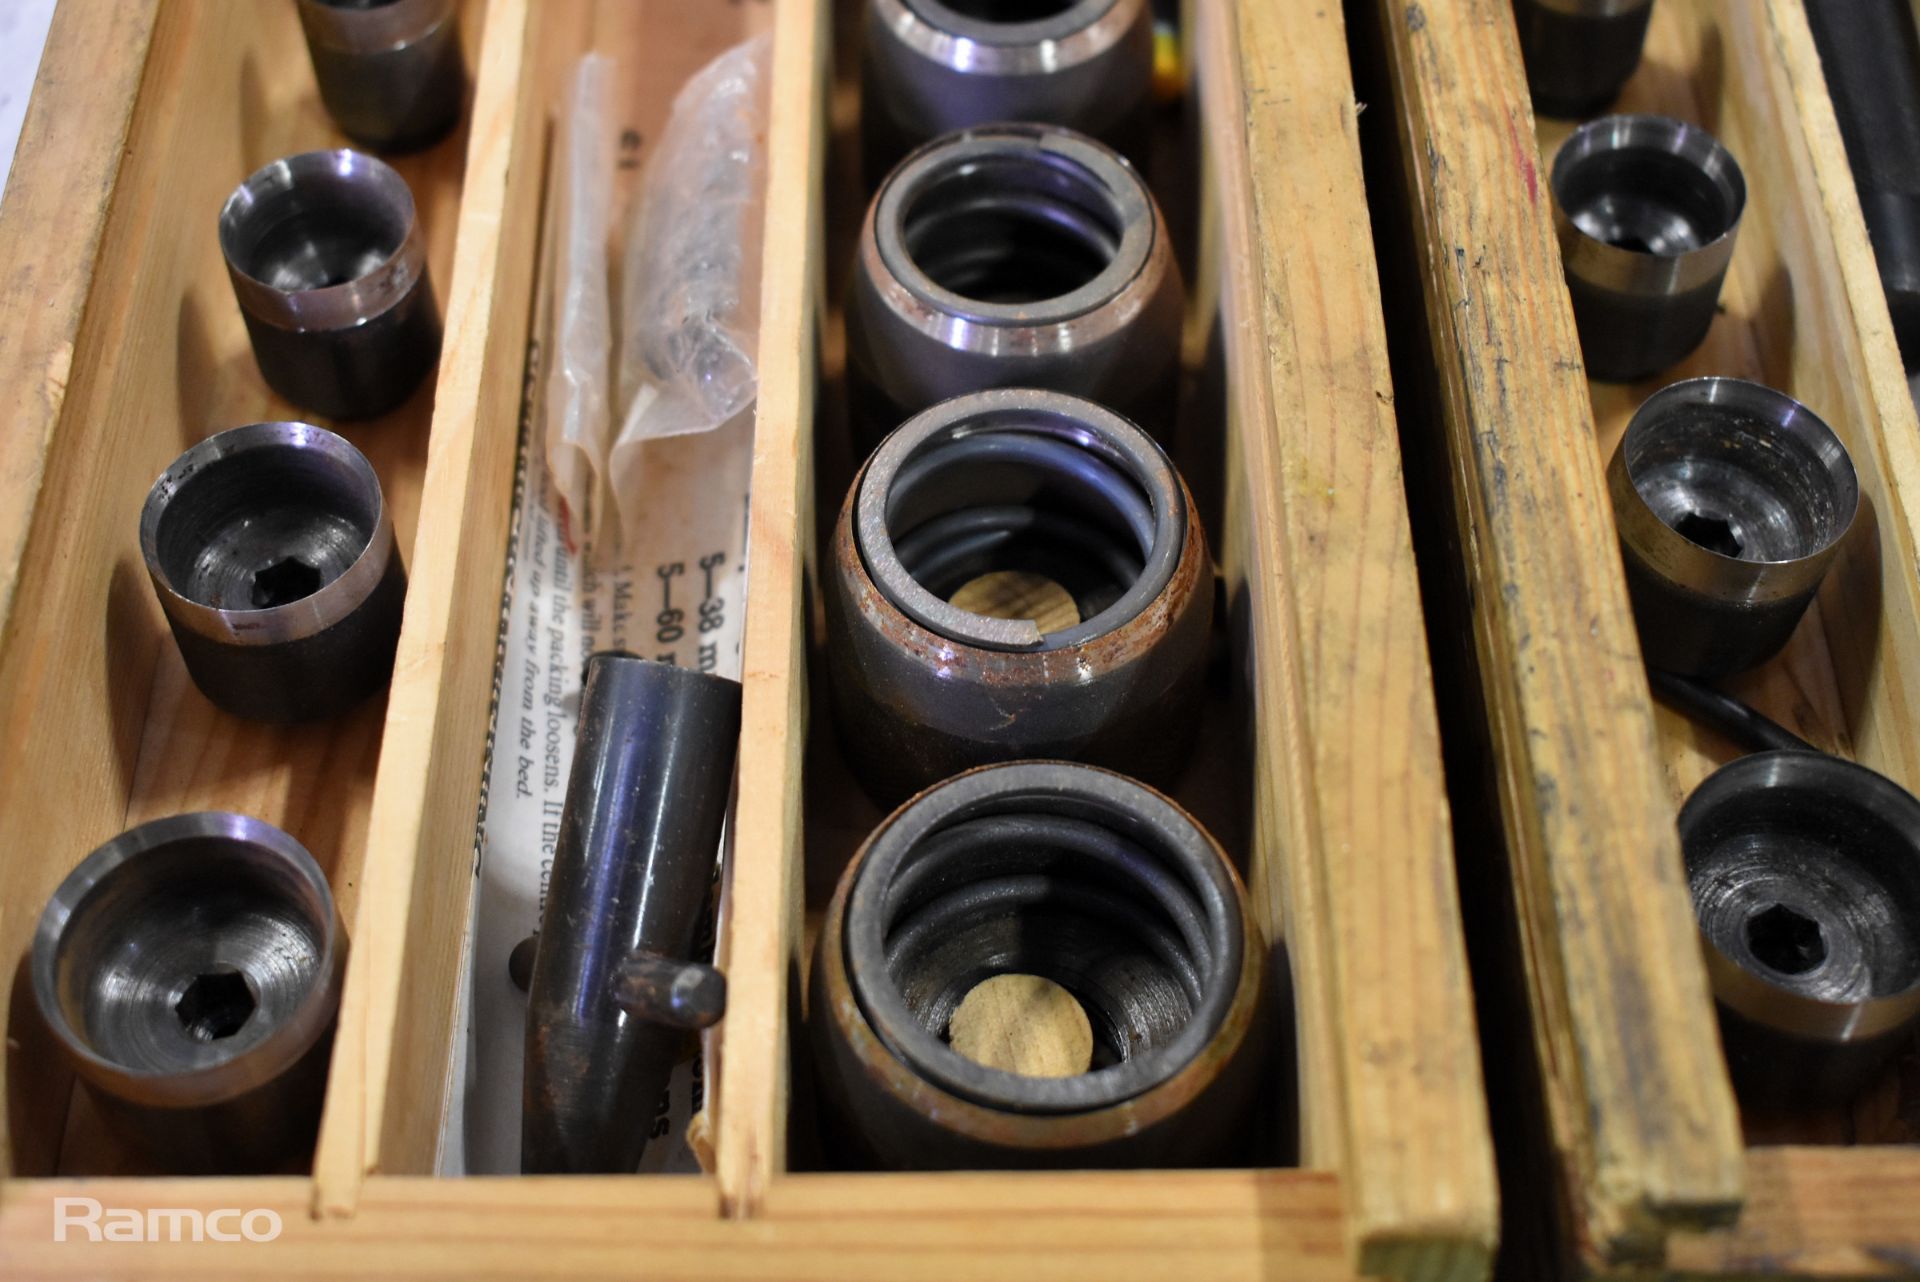 4x Maby Ring punch sets in wooden storage box - Image 3 of 7